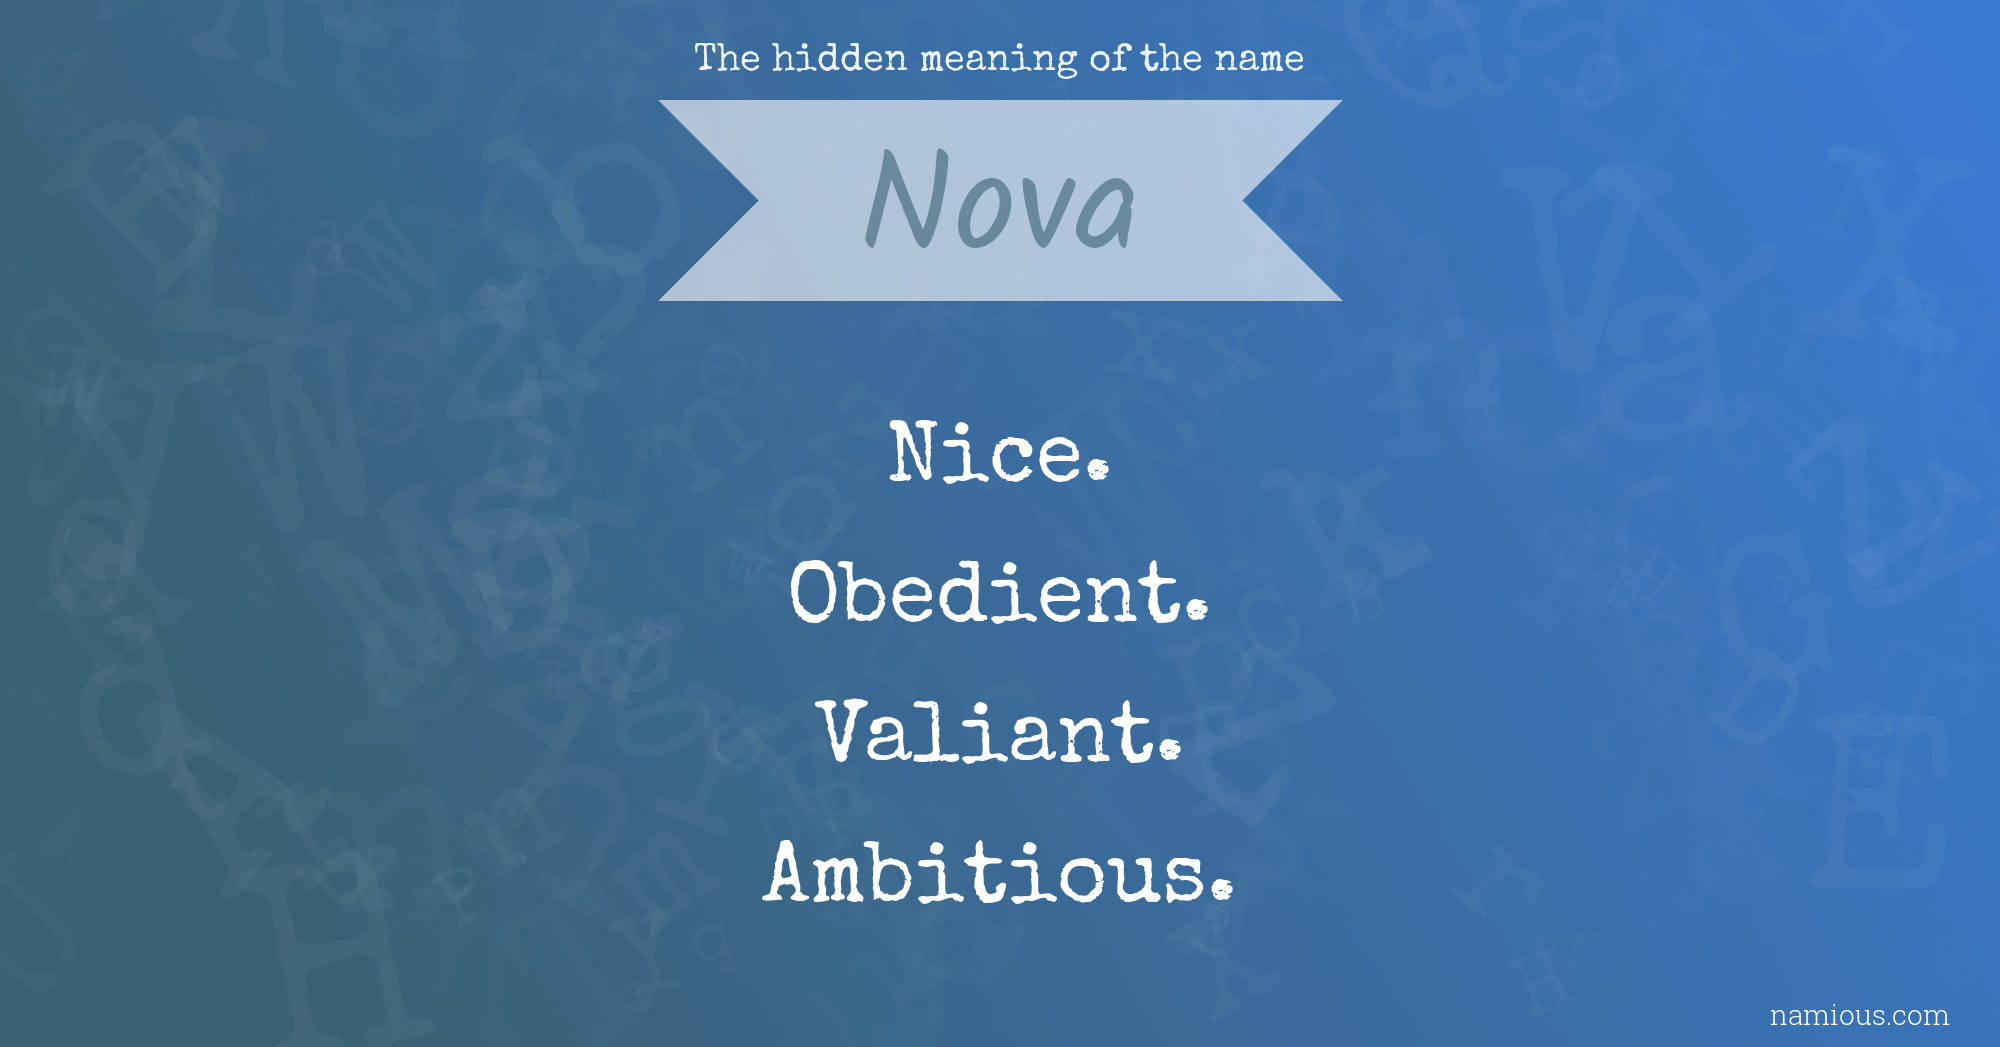 The hidden meaning of the name Nova